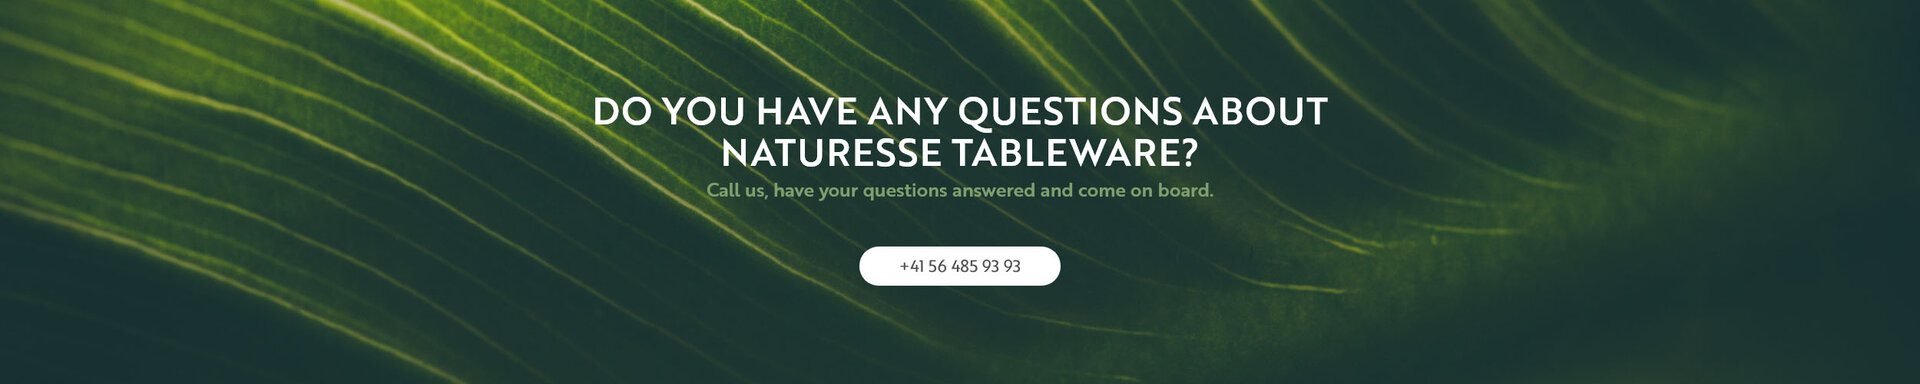 Do you have any questions about naturesse tableware?